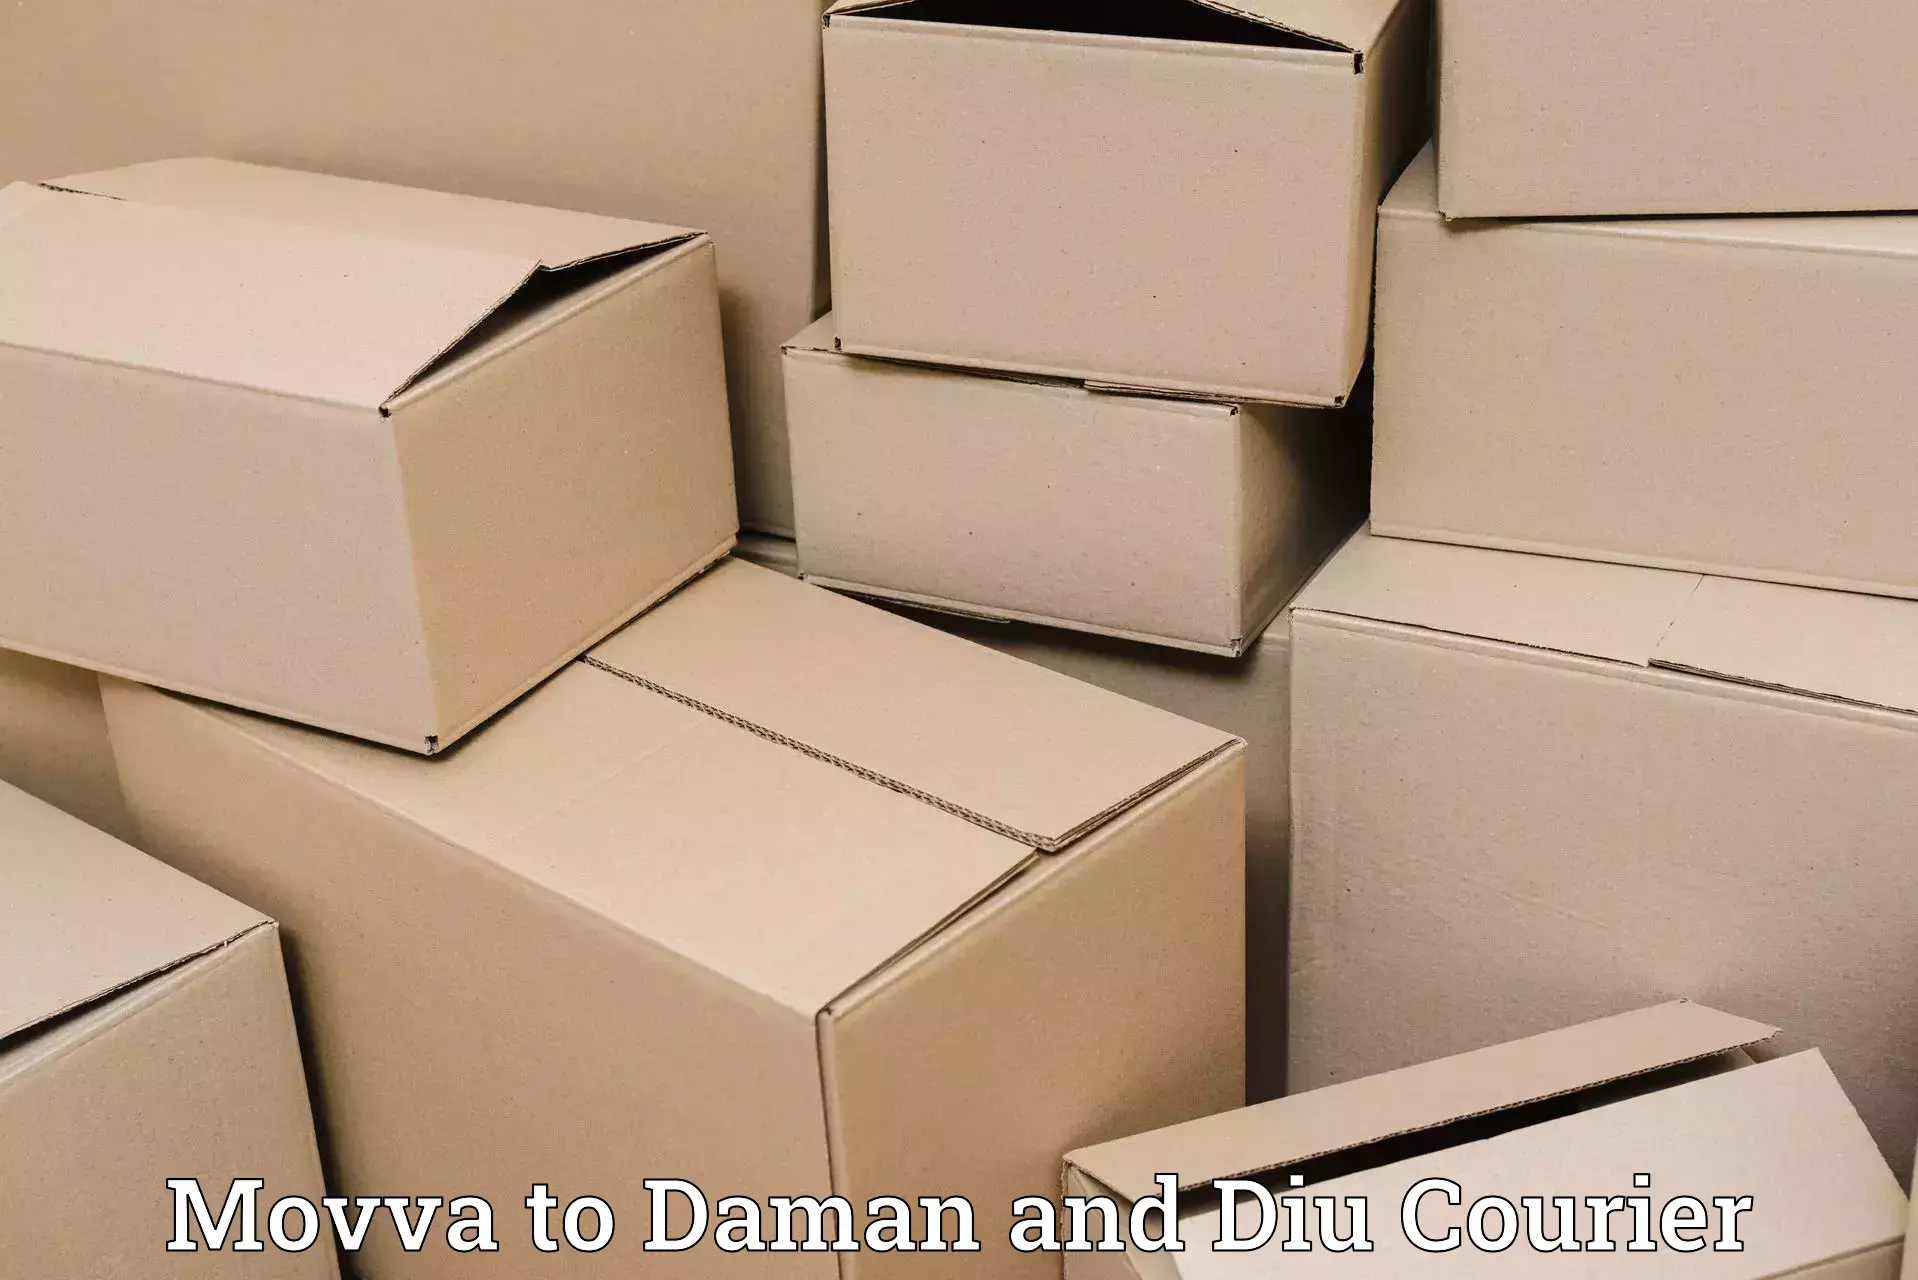 Customizable delivery plans Movva to Diu